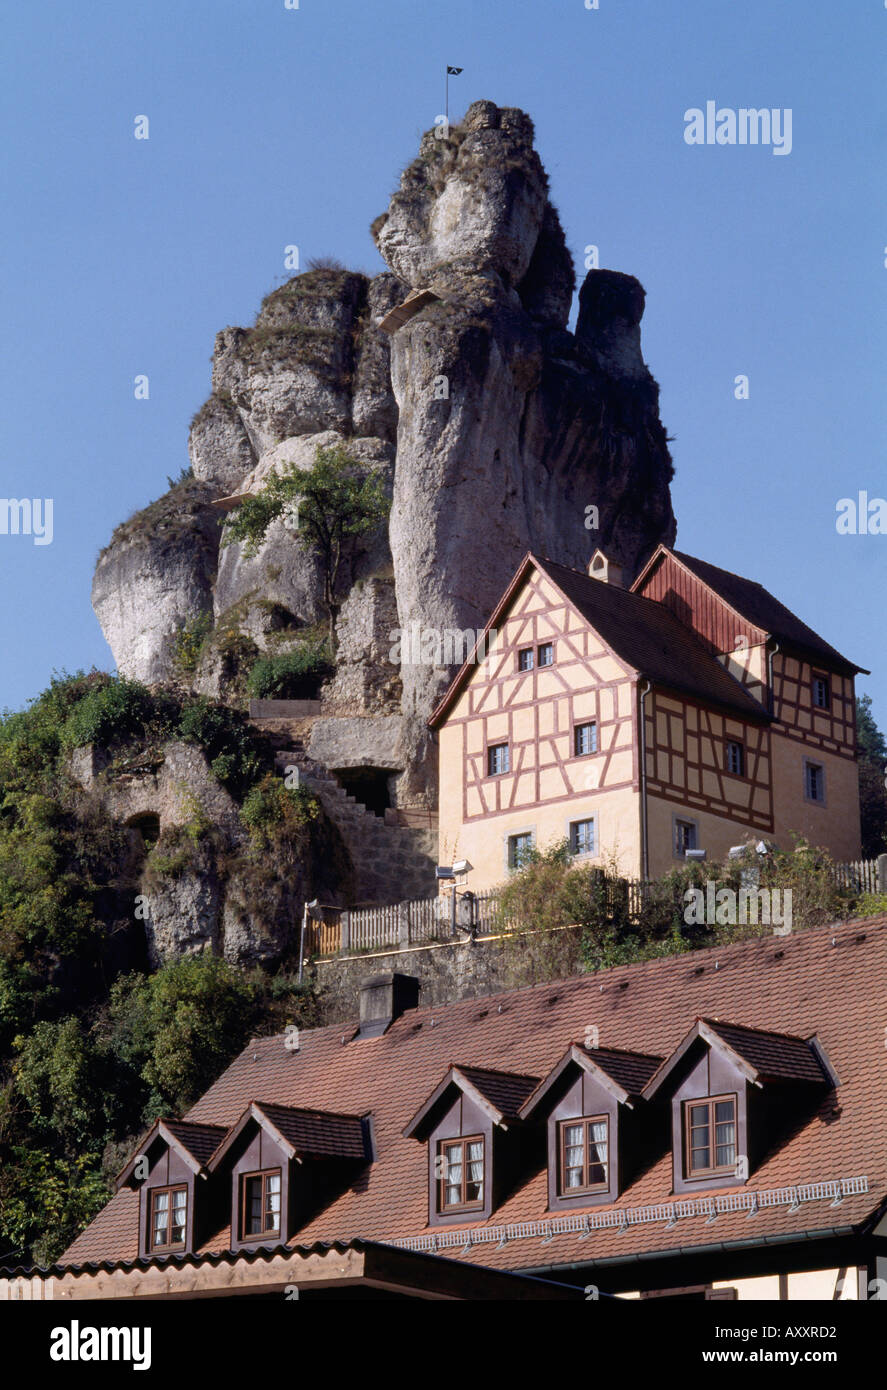 Dorf High Resolution Stock Photography and Images - Alamy